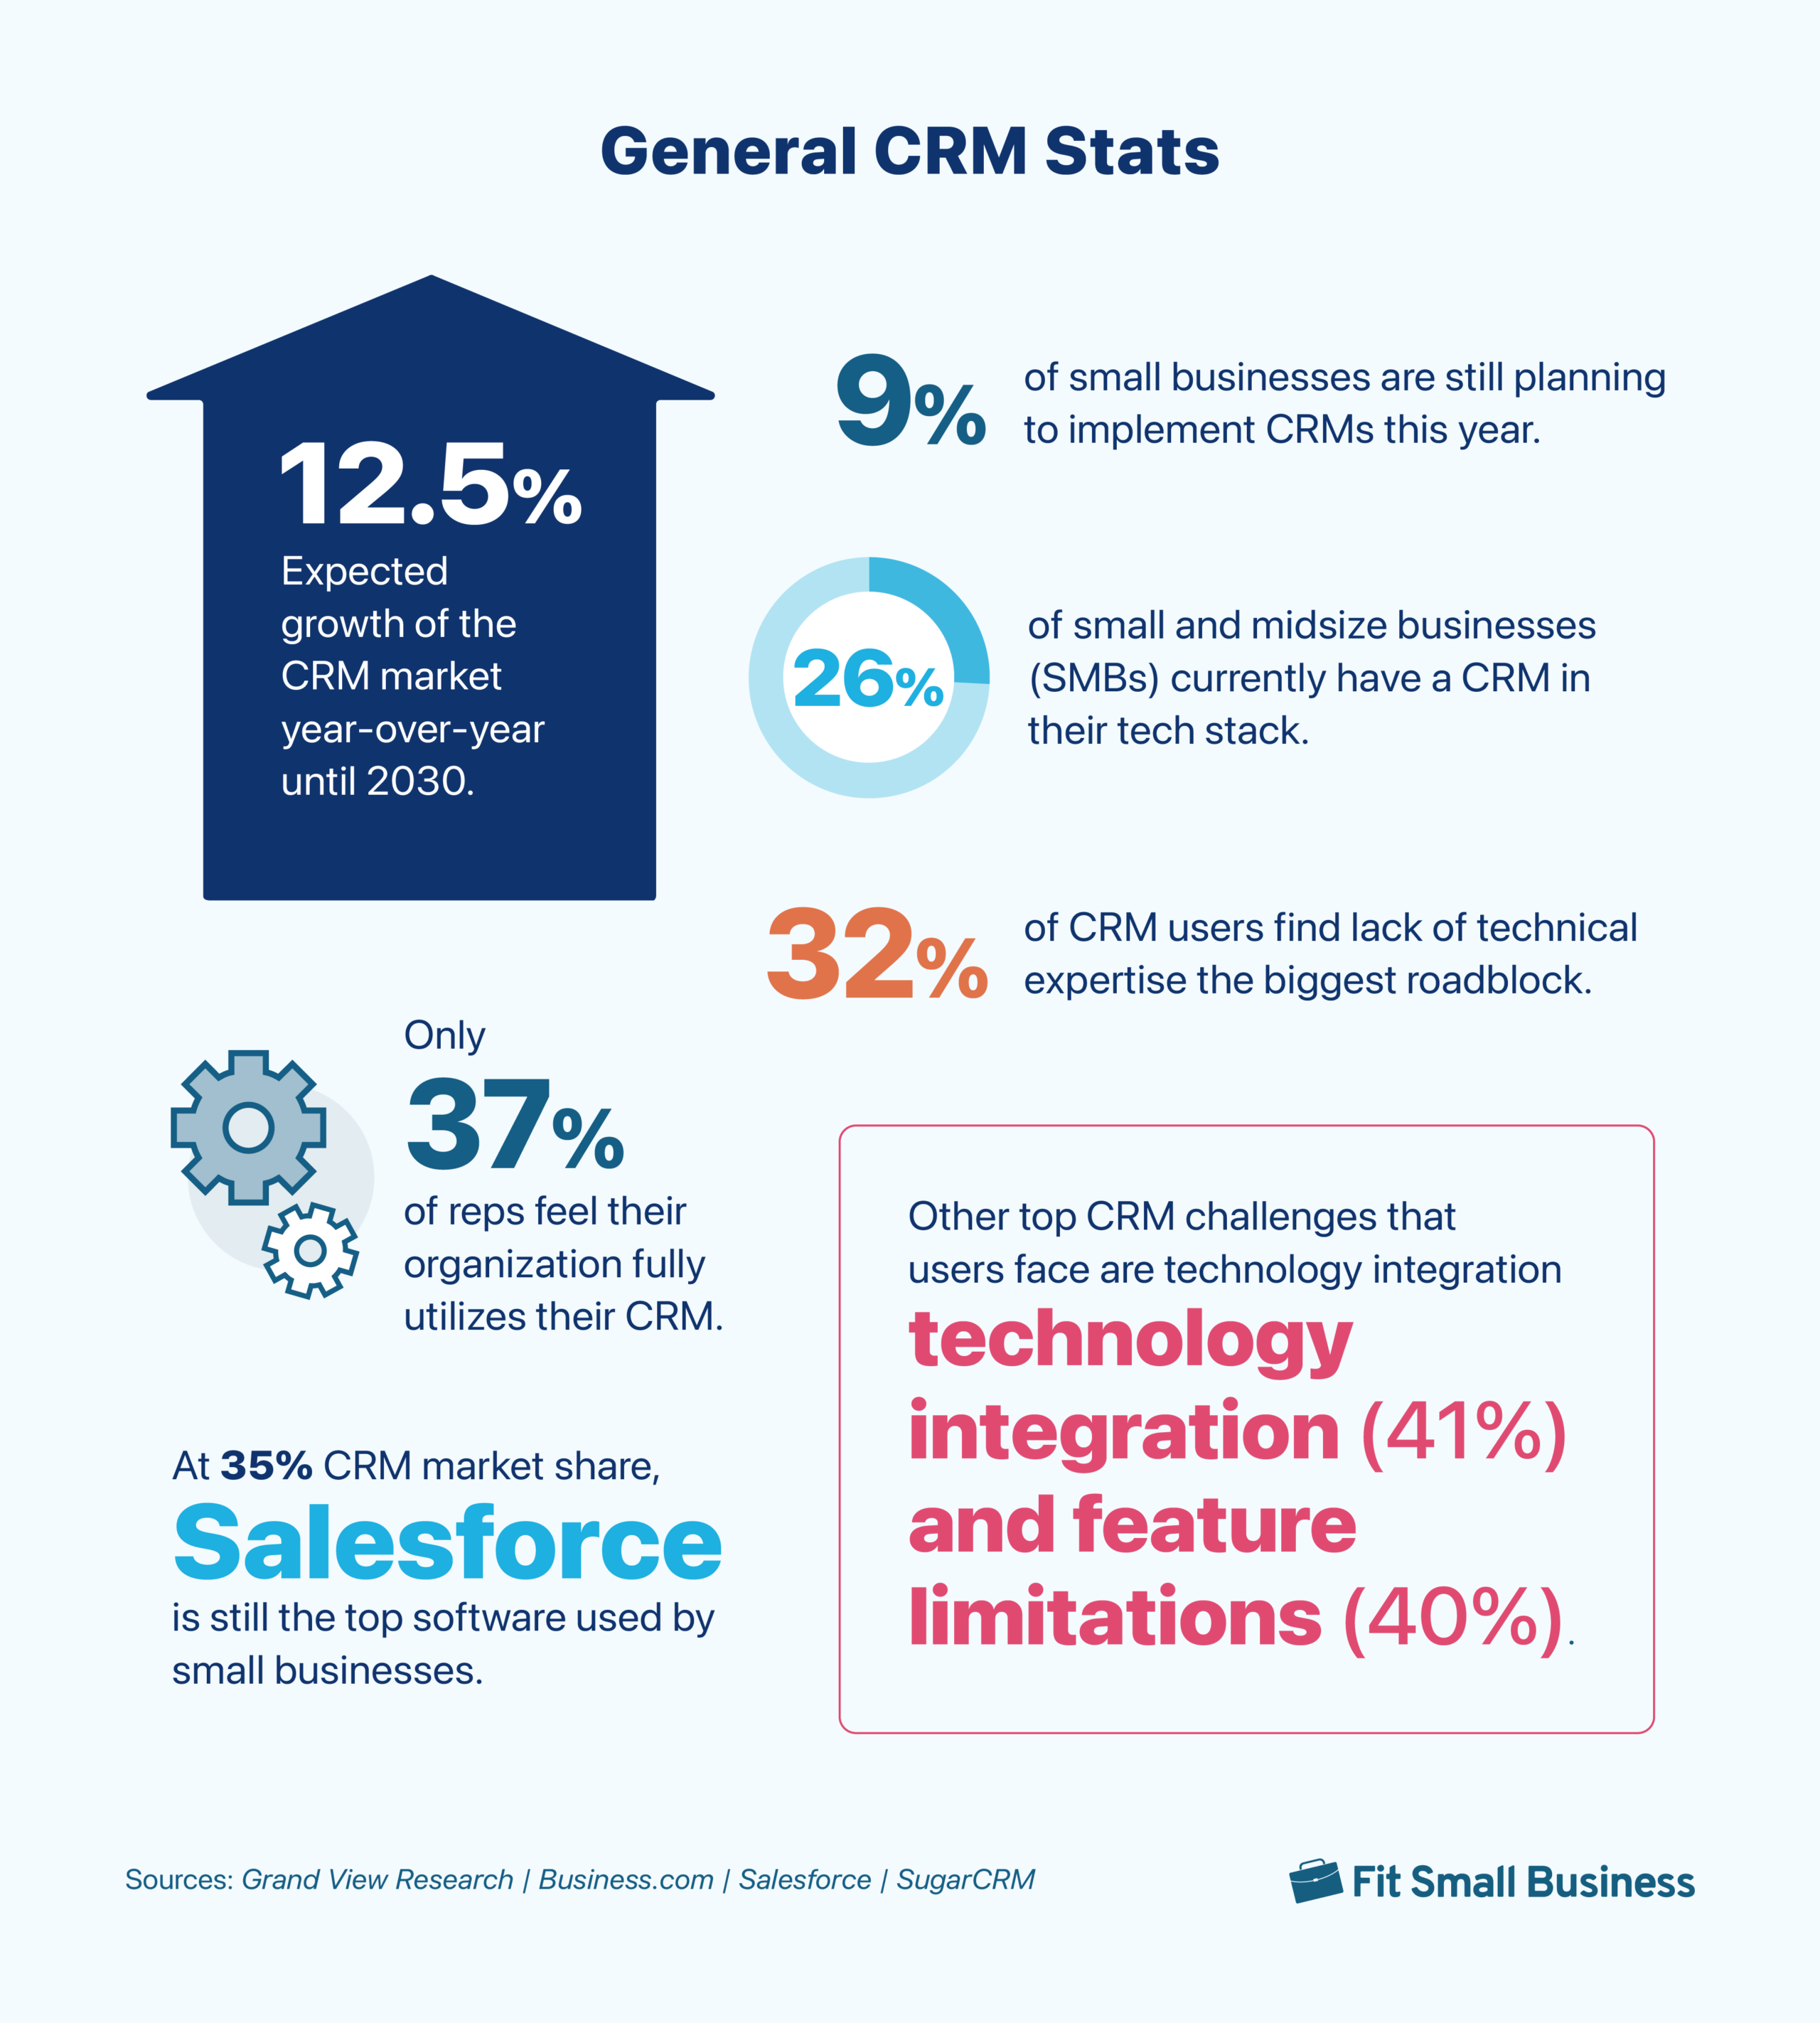 An infographic containing several general CRM statistics.